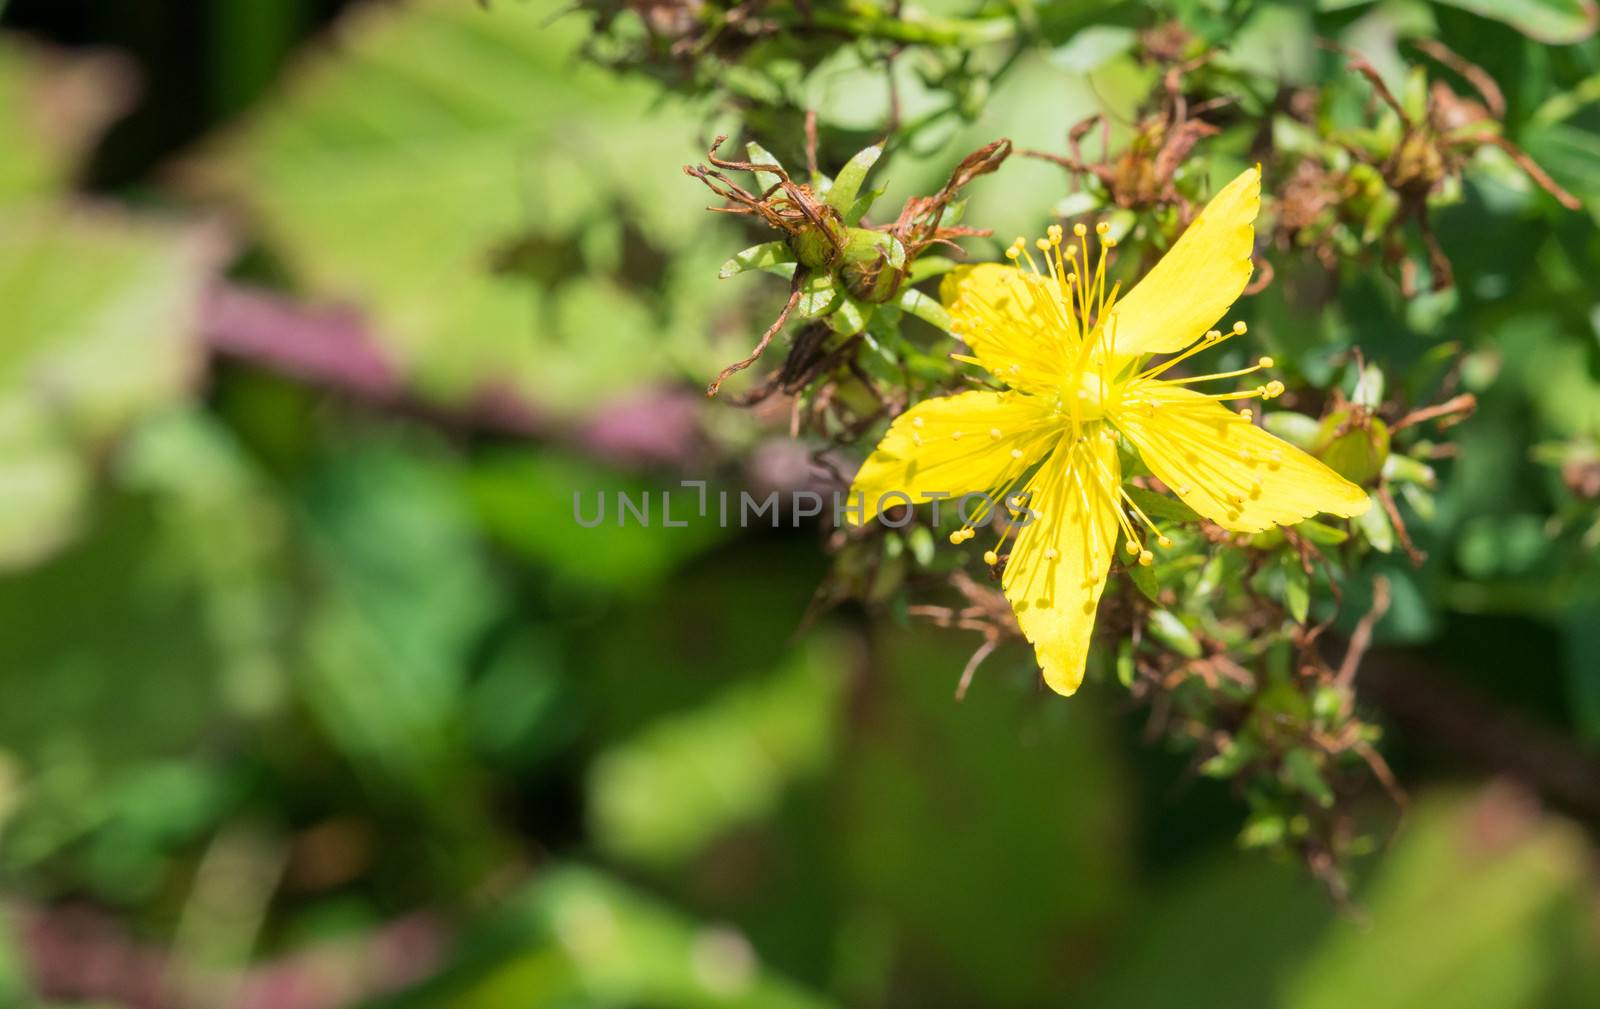 Close up of a Common Saint John's Wort flower. Also known as Perforate St. John's-wort.